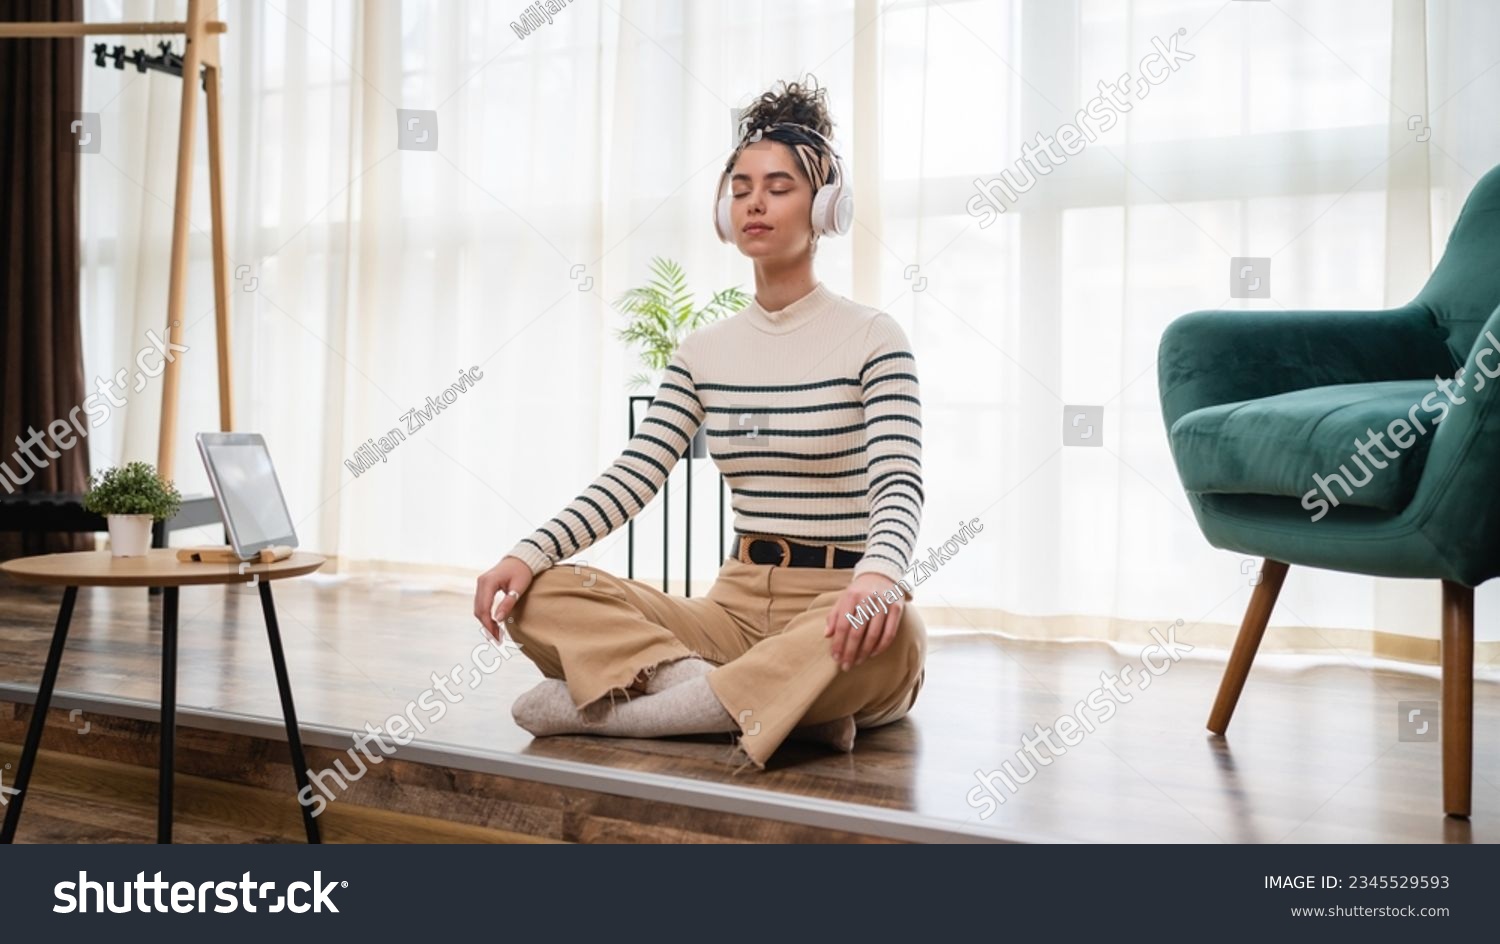 one woman adult caucasian female millennial using headphones for online guided meditation practicing mindfulness yoga with eyes closed on the floor at home real people self care concept copy space #2345529593